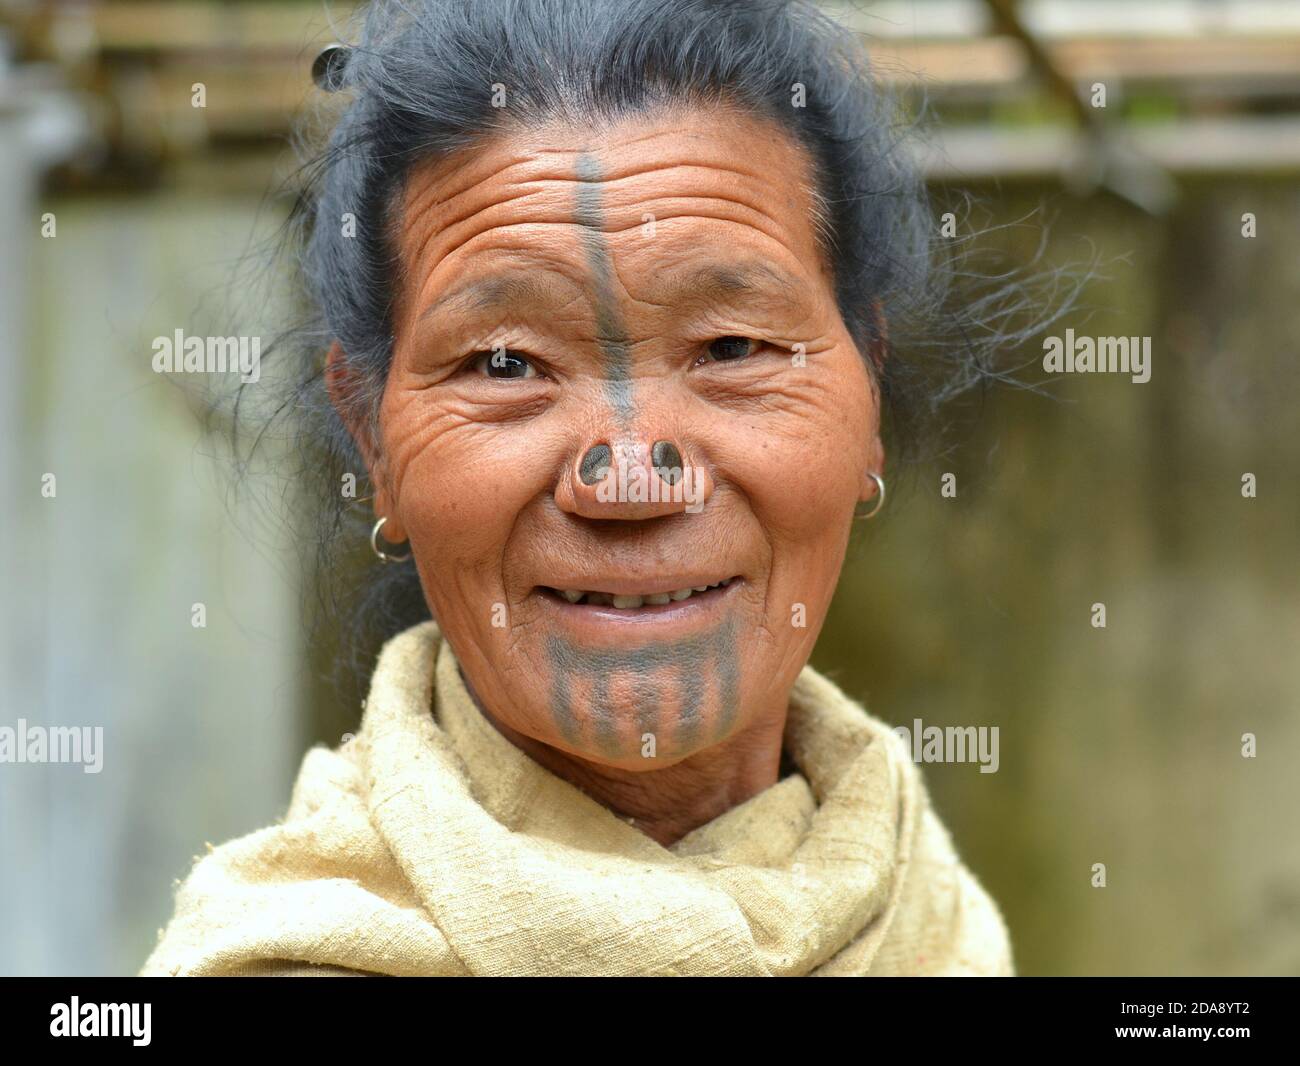 Elderly Northeast Indian Apatani ethnic minority tribal woman with black wooden nose plugs and traditional face tattoos smiles for the camera. Stock Photo